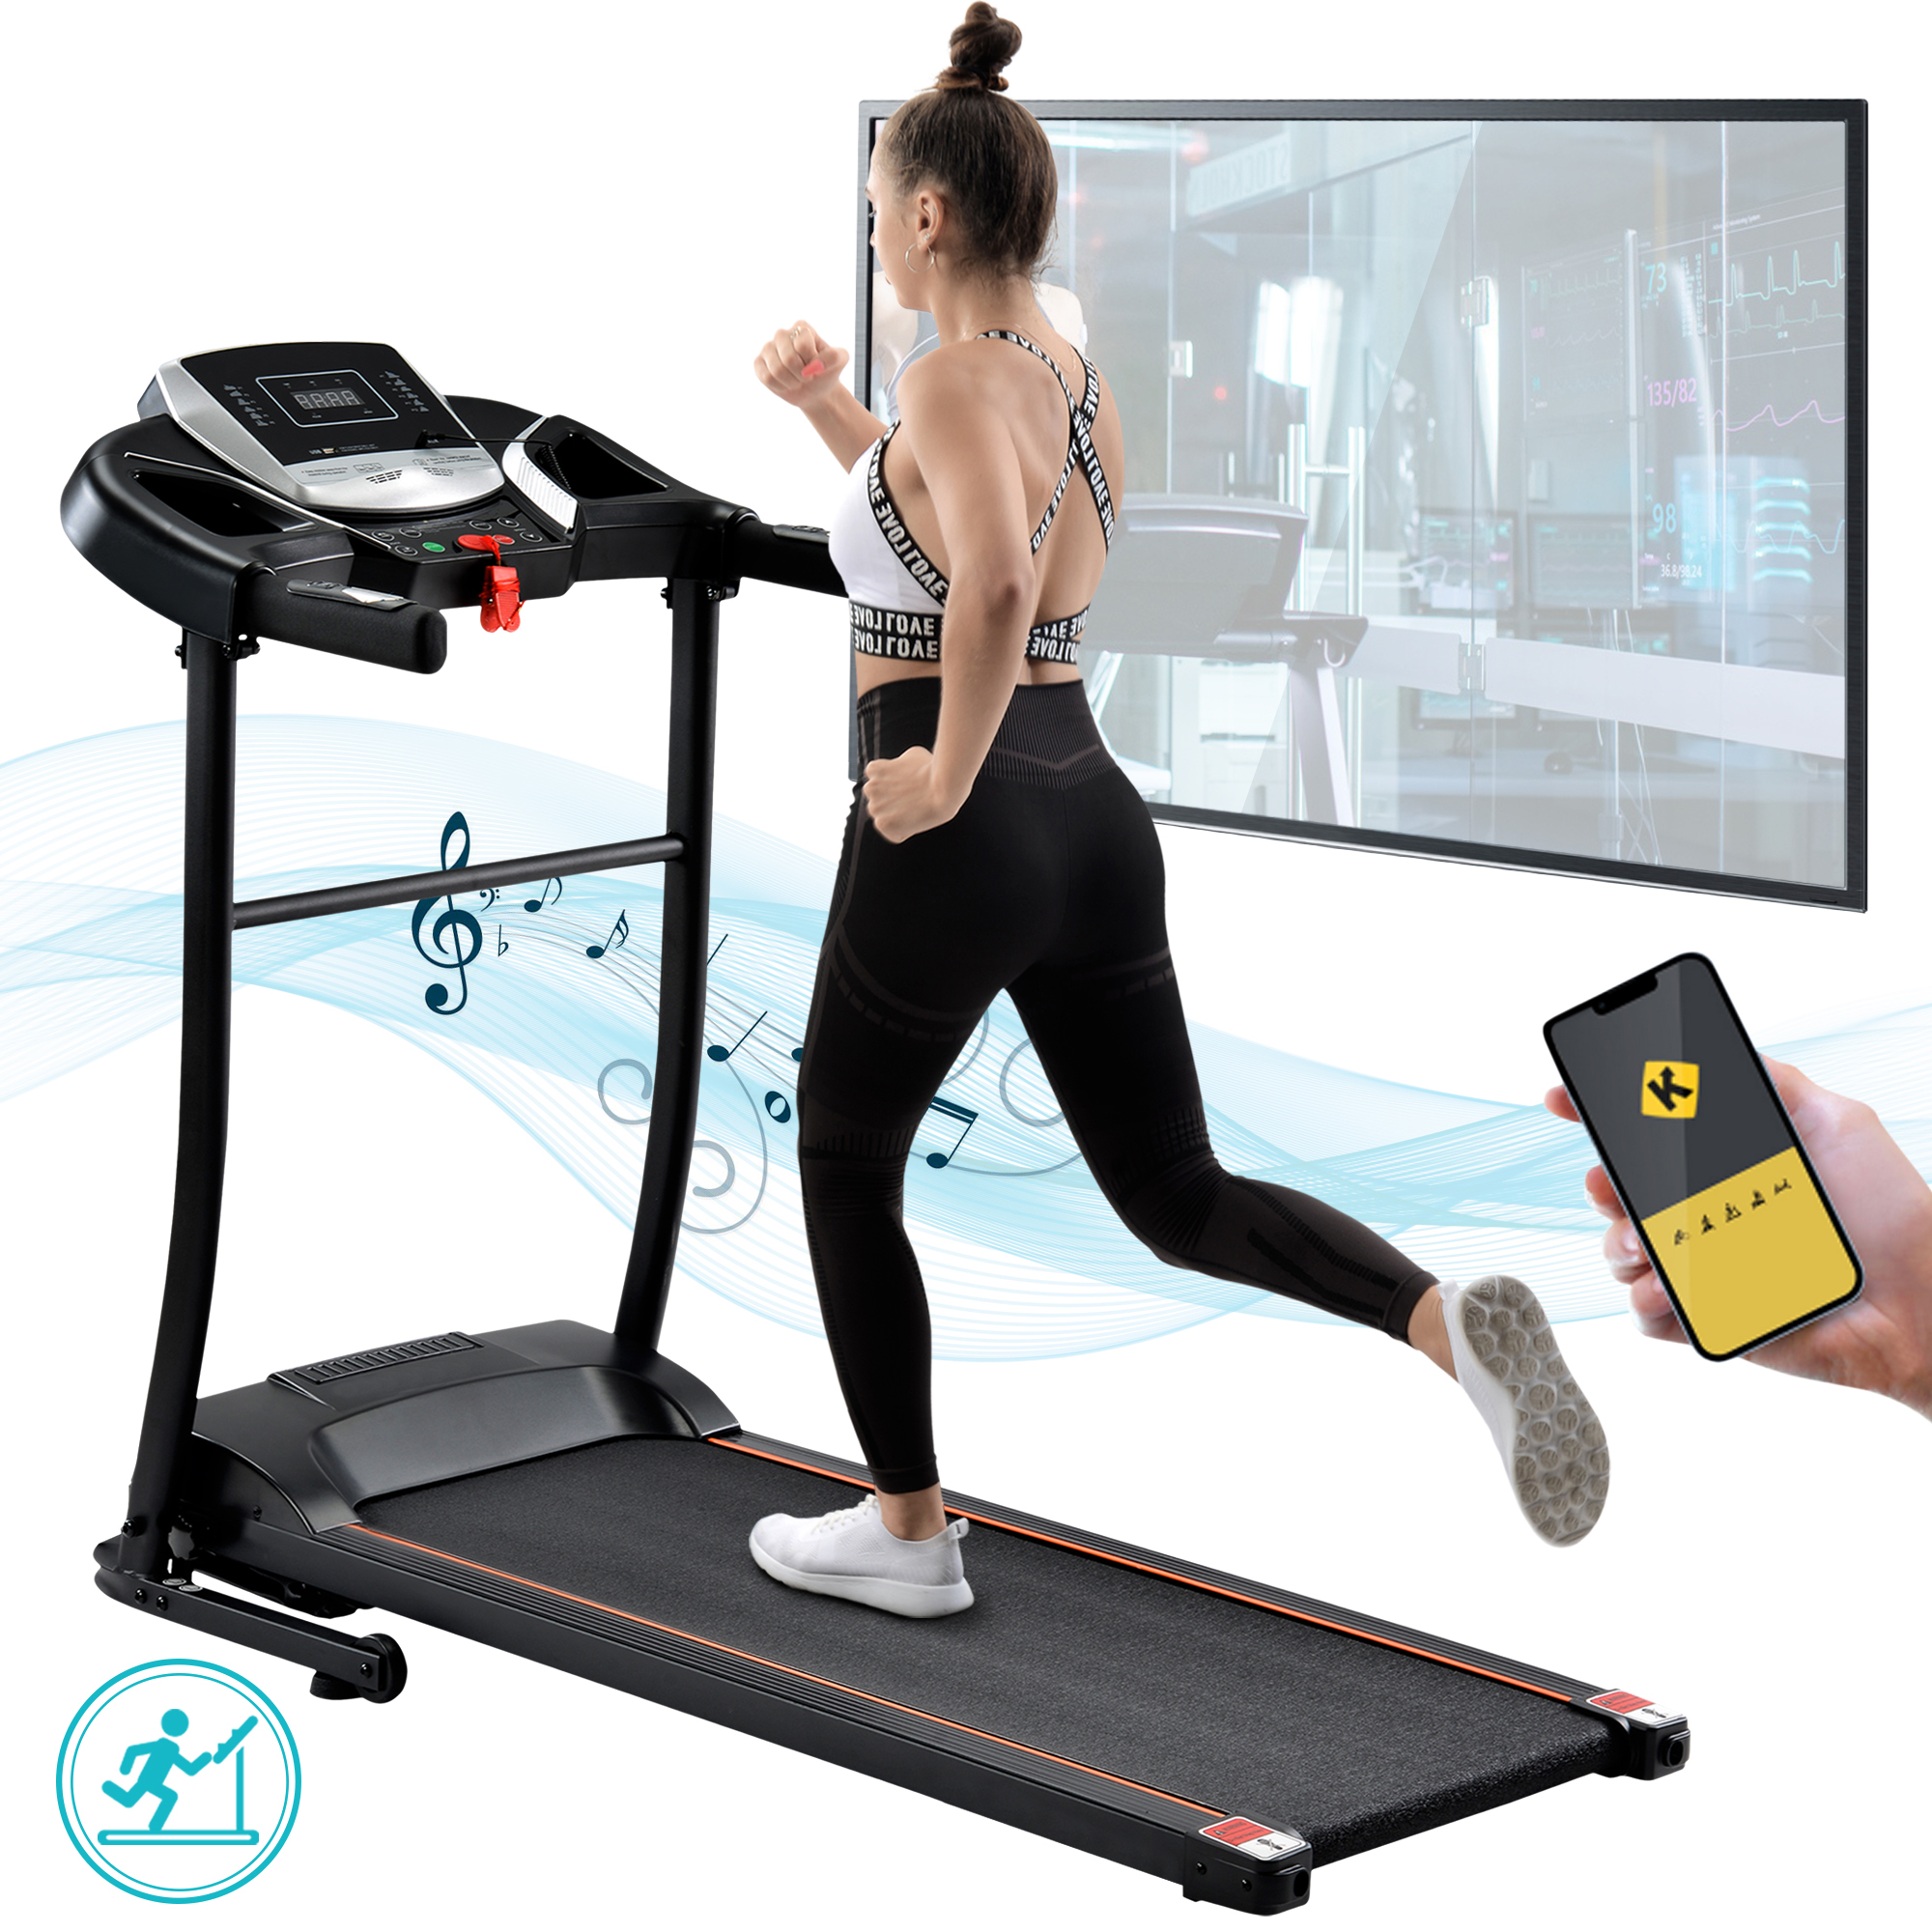 with USB Schwarz App, LINGDA Exercise Display Kinomap for Home, Equipment Running LED Bluetooth Treadmill Laufband, Foldable